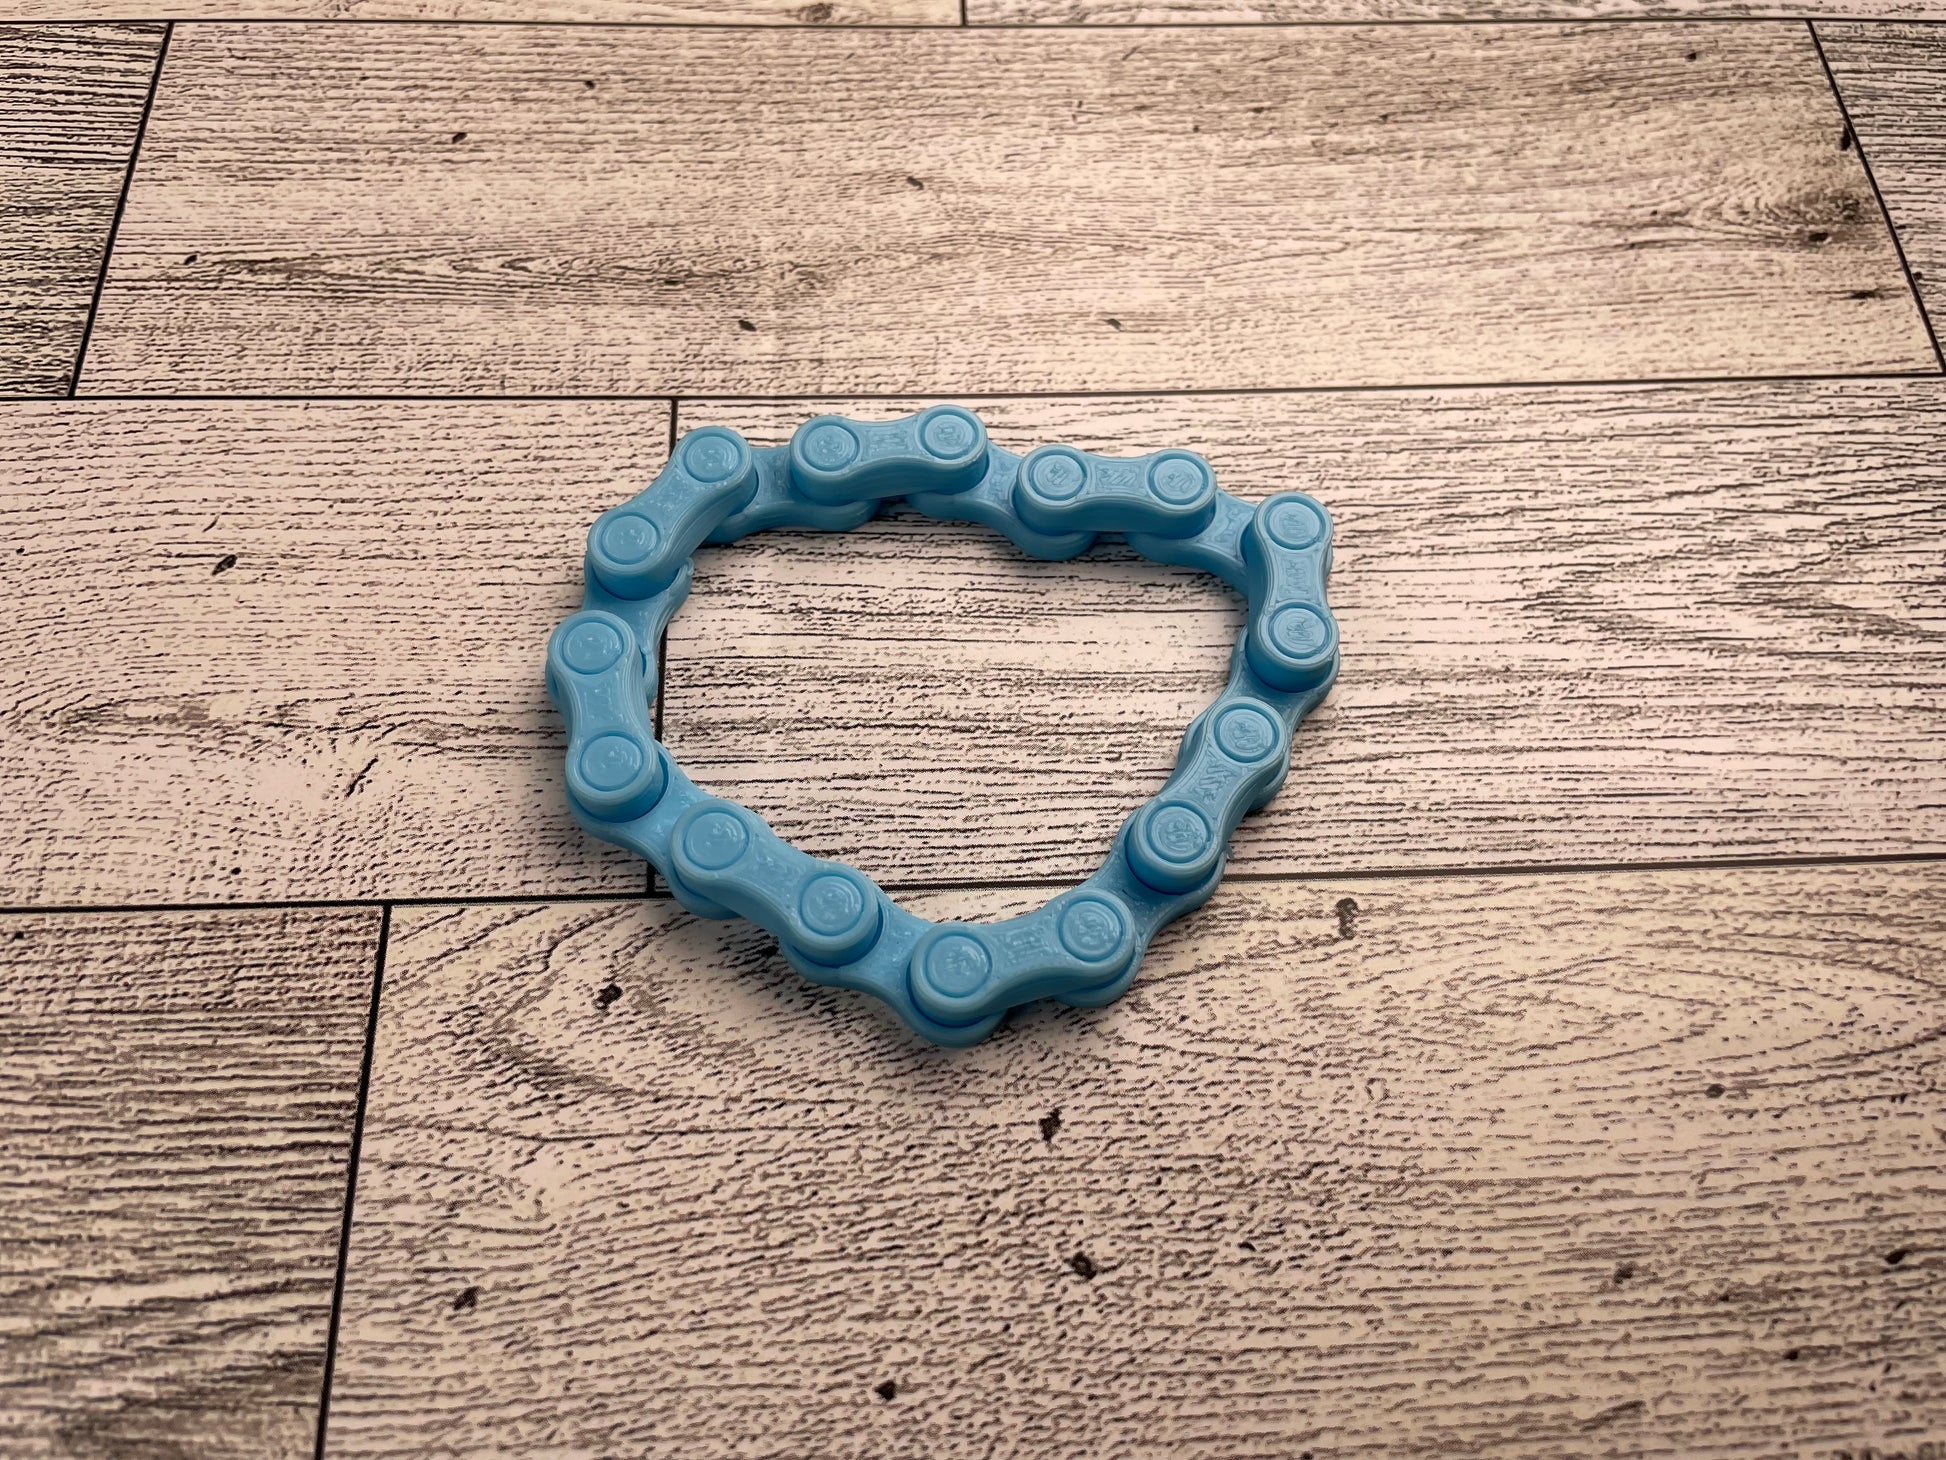 A light blue chain link on a wood backdrop. The chain is arranged in a squished circle and there are eight links.